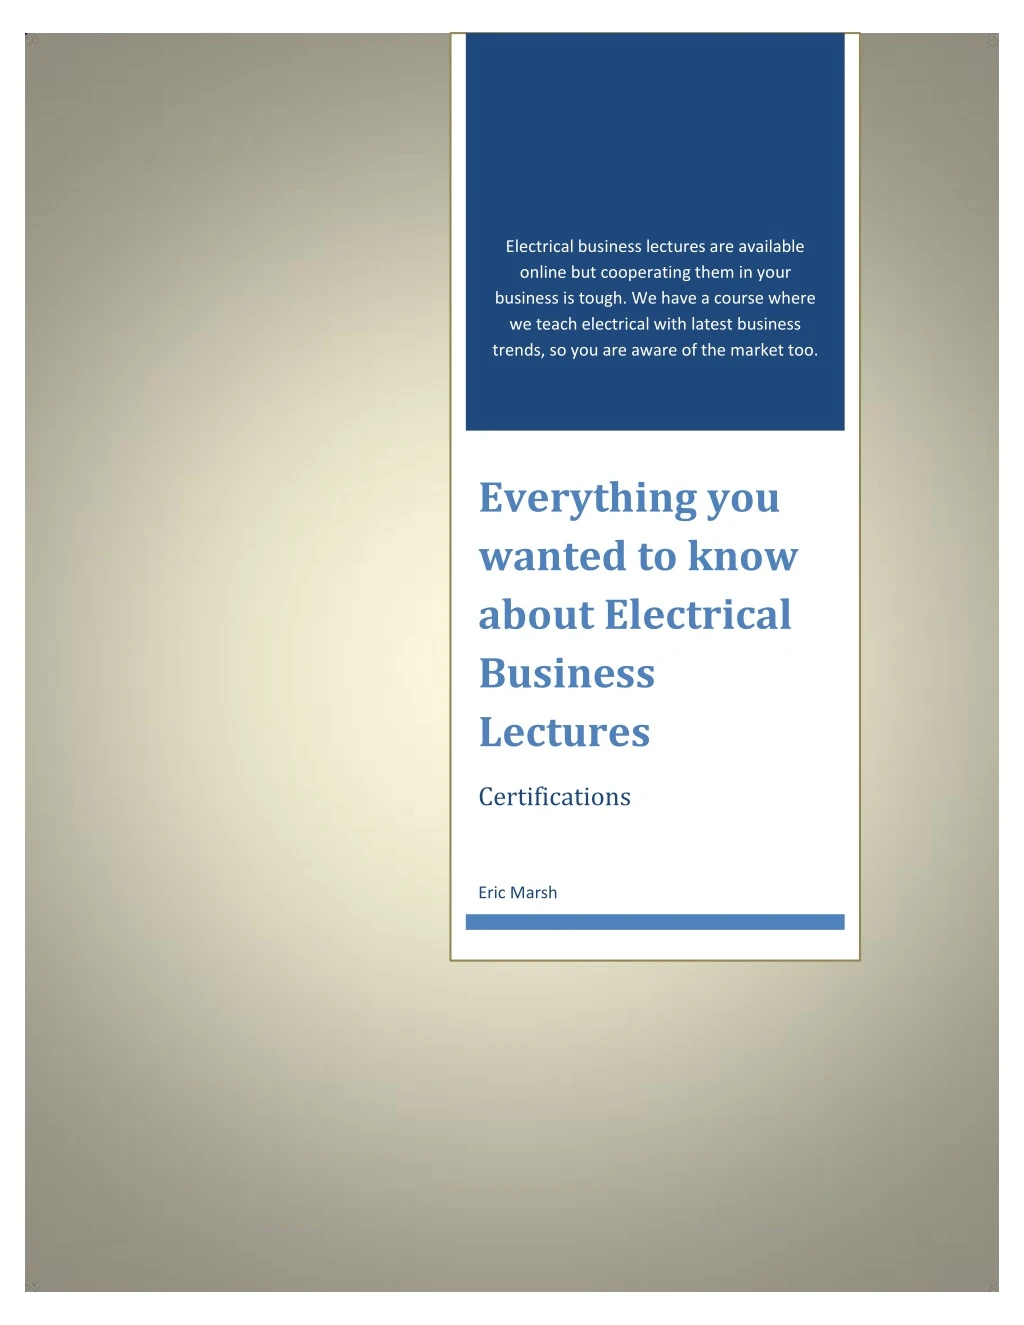 electrical business lectures are available online